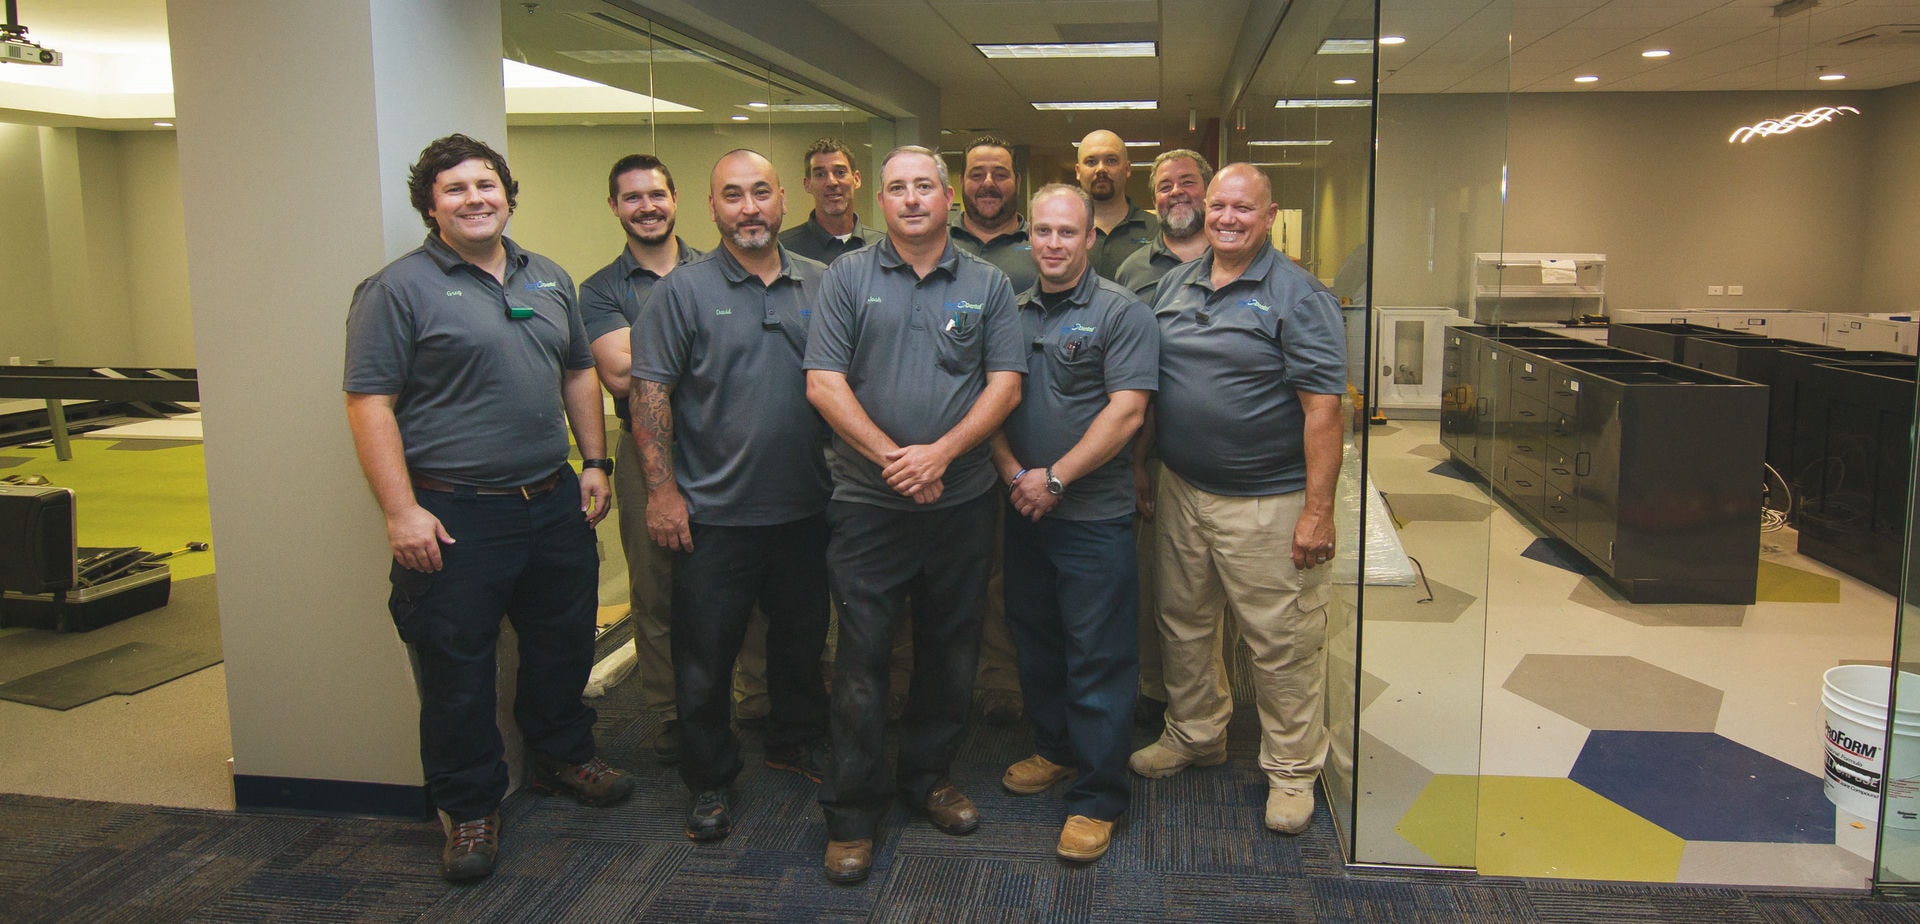 The crew of 17 Benco Dental Service Technicians who traveled in from seven of the companies regions of dental equipment service coverage.